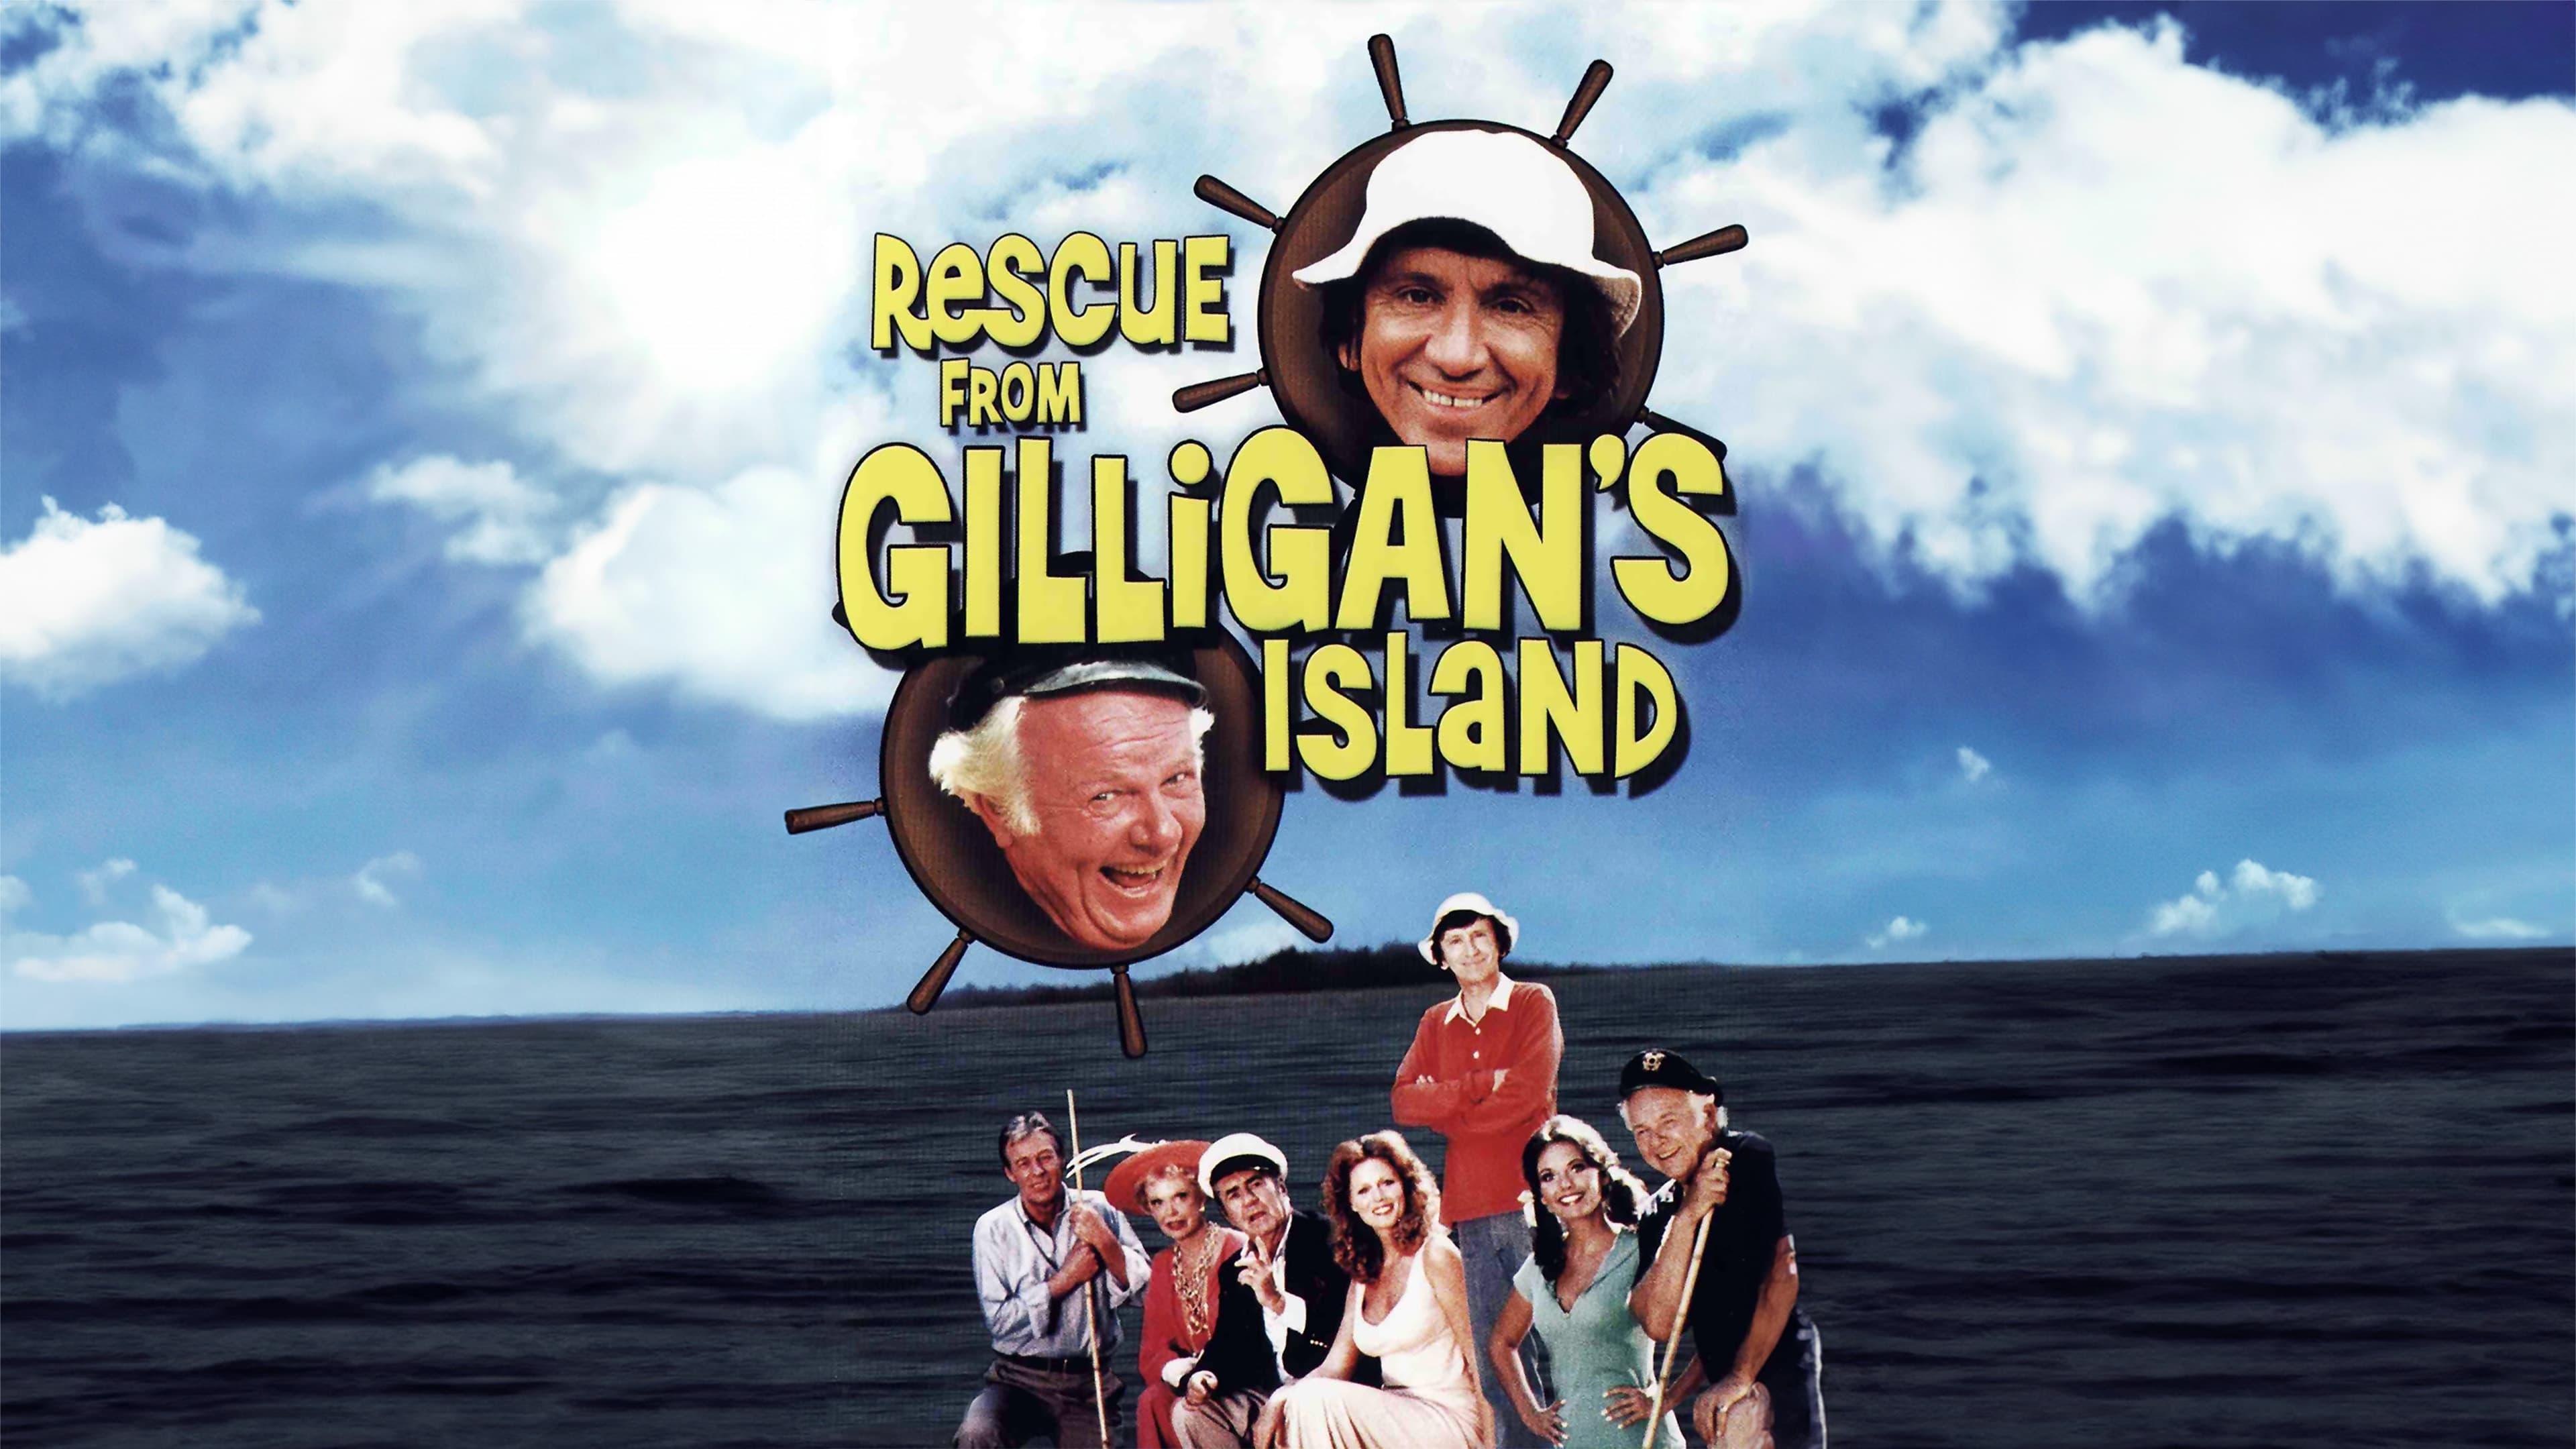 Rescue from Gilligan's Island backdrop